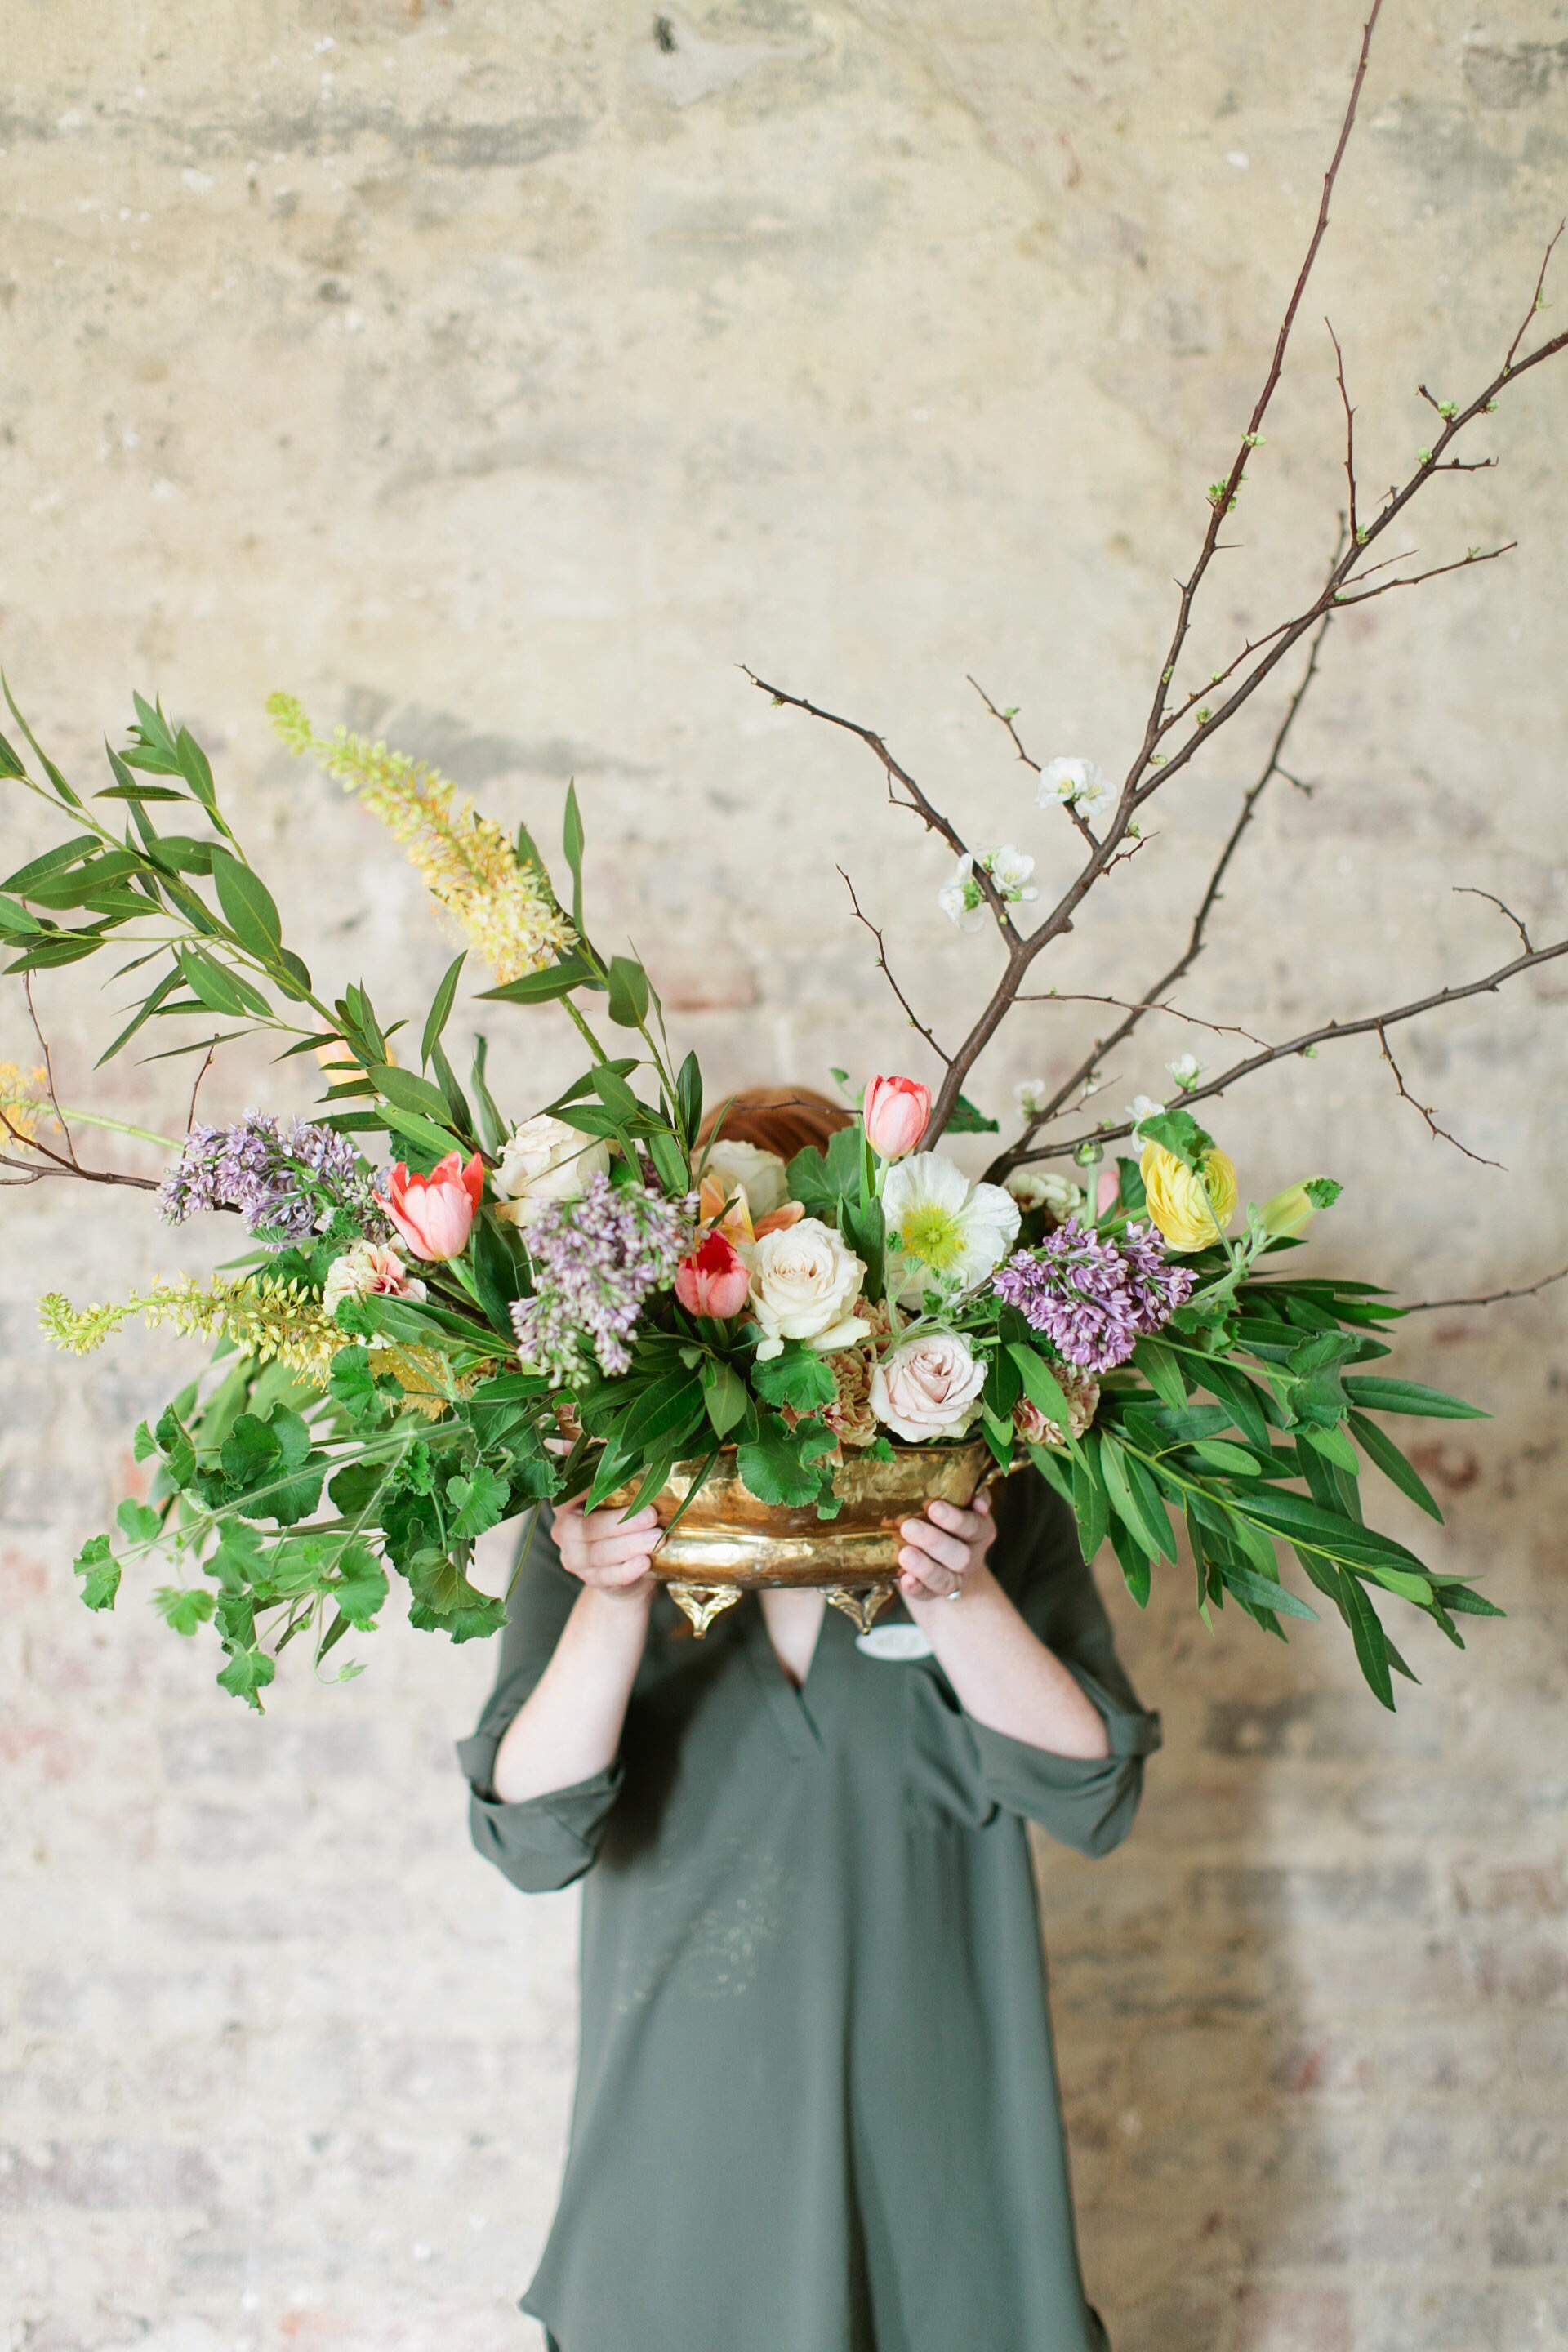  Floral arrangement inspiration | Nashville, Tennessee | The School of Styling - A three-day hands-on for creative entrepreneurs.  http://www.theschoolofstyling.com  